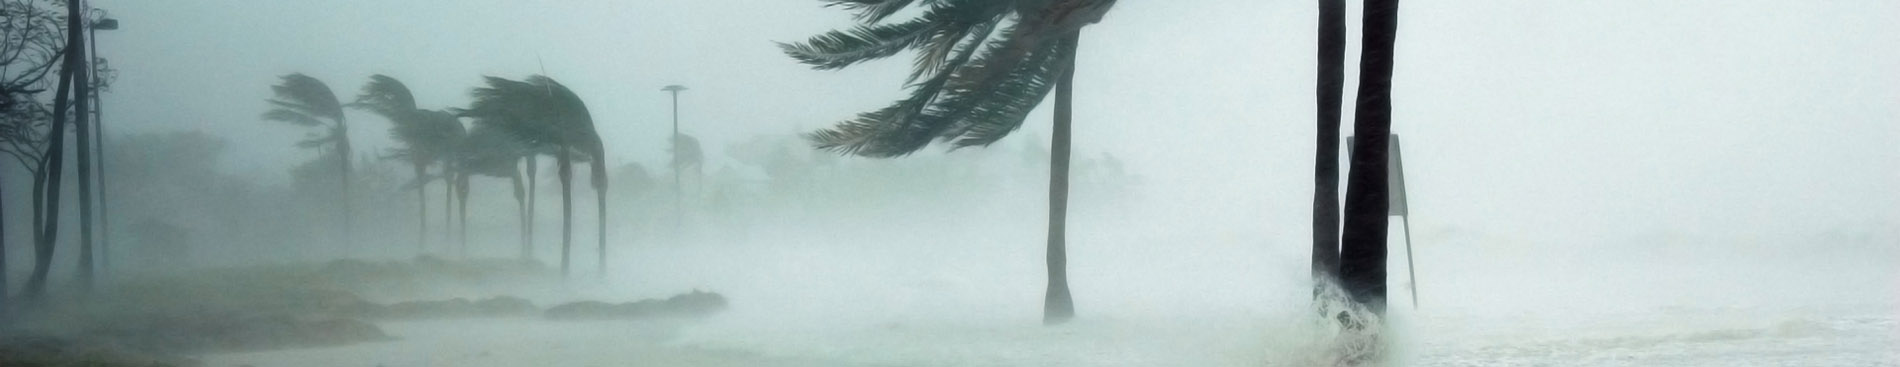 Palm trees being blown by hurricane winds.